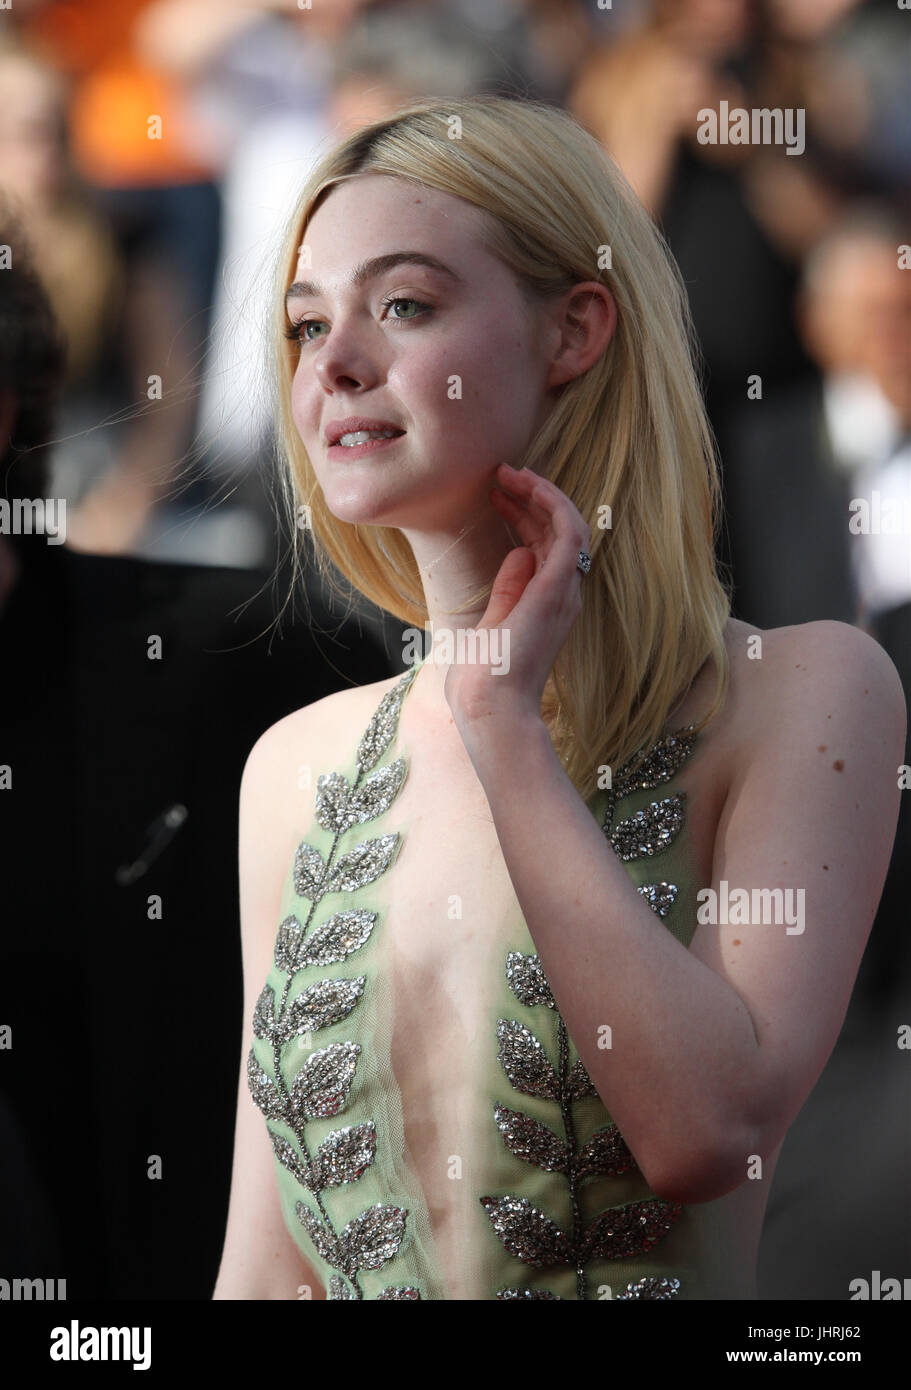 Actress Elle Fanning departs after the How To Talk To Girls At Parties screening during the 70th annual Cannes Film Festival at Palais des Festivals on May 21, 2017 in Cannes, France. Stock Photo